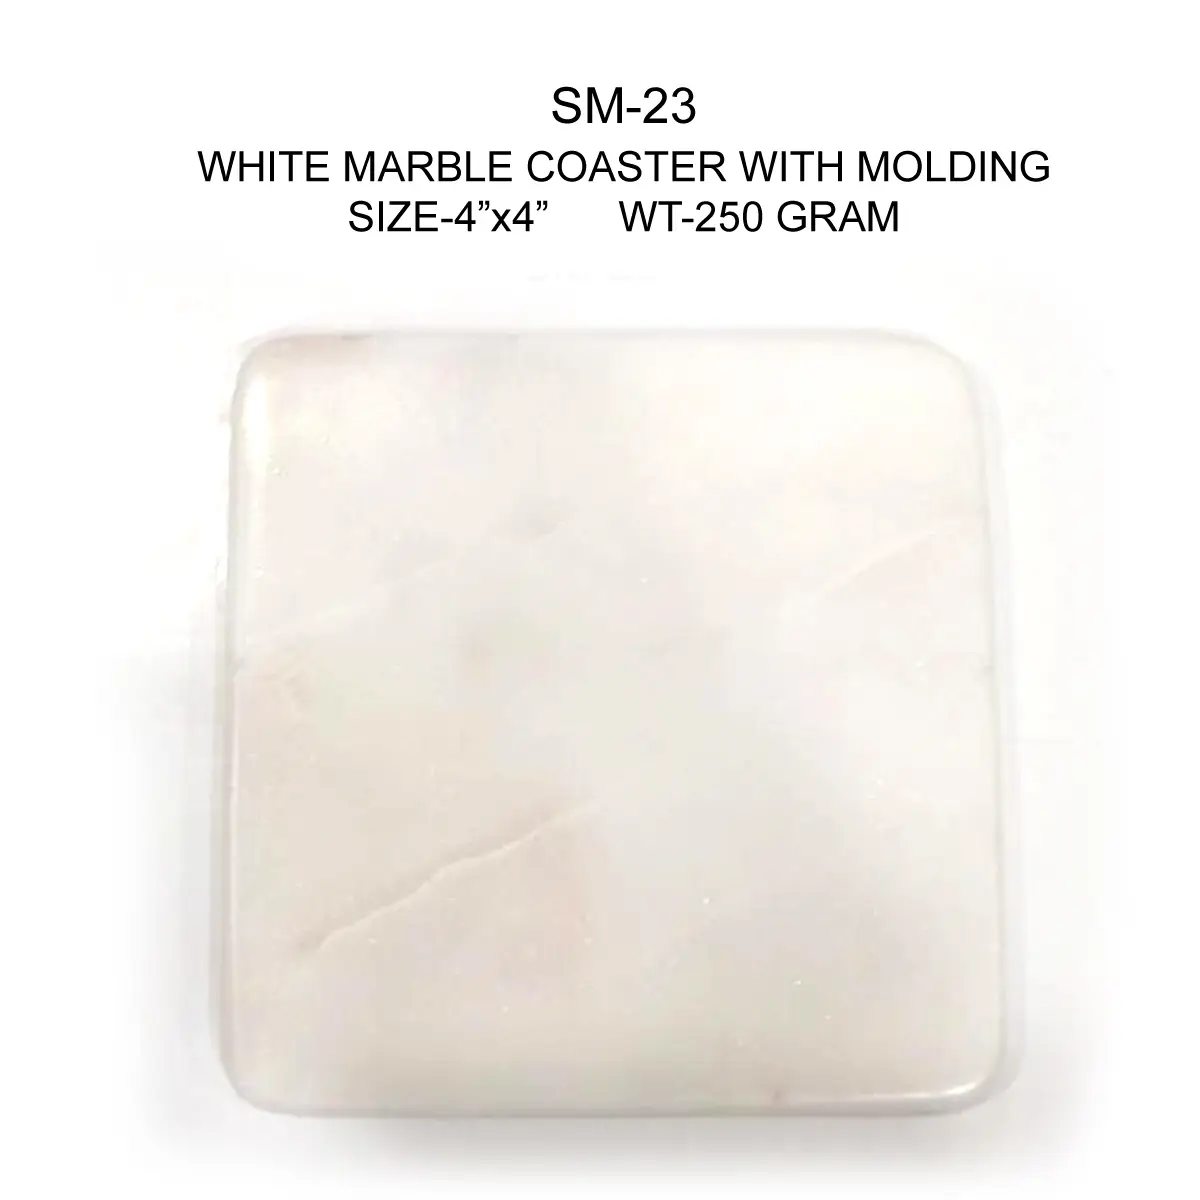 WHITE MARBLE COASTER WITH MOLDING